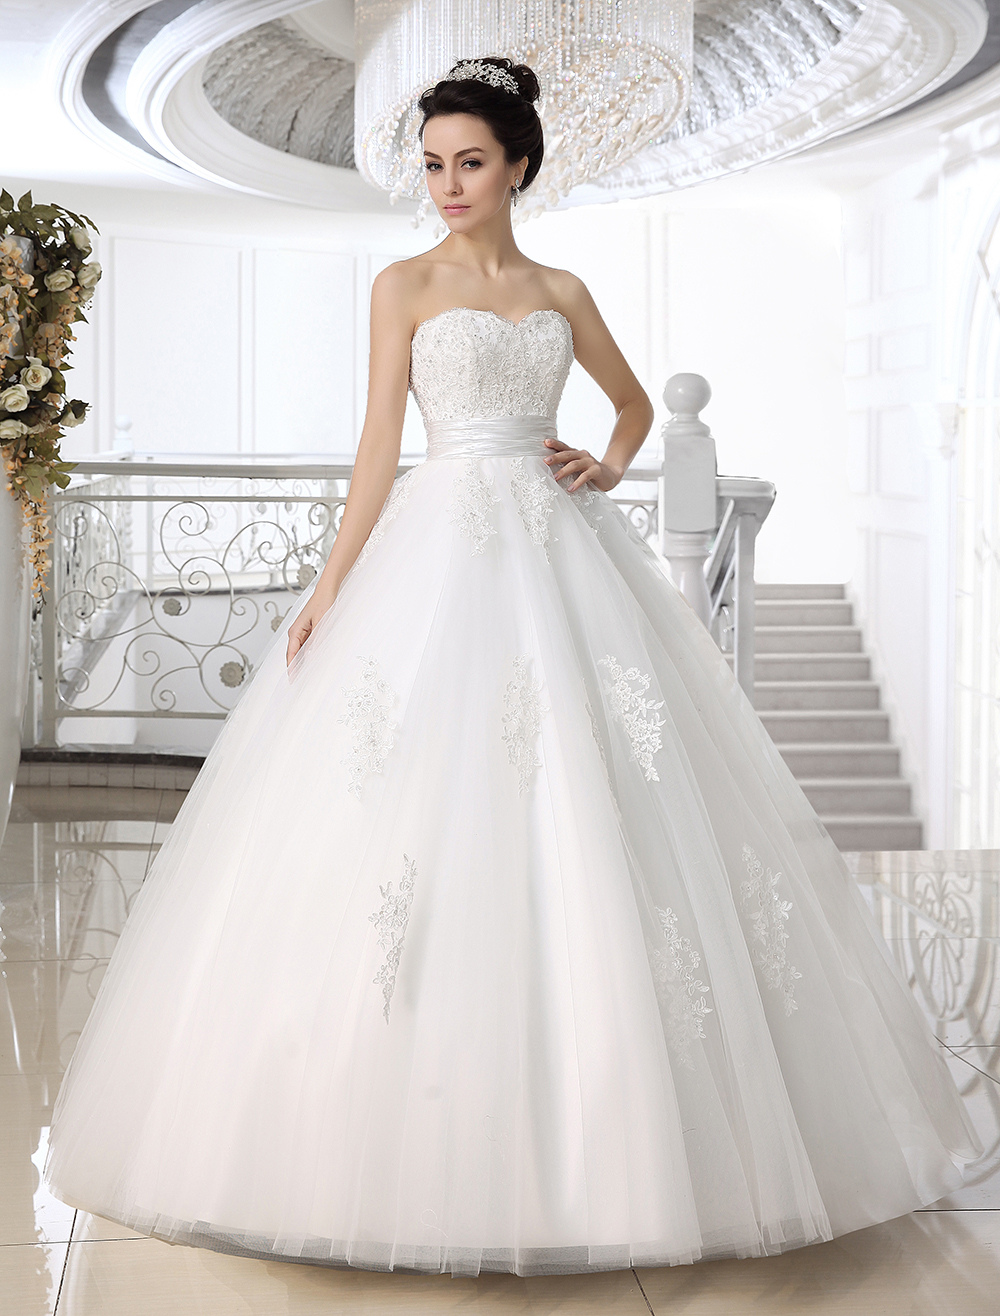 White Ball Gown Strapless Sweetheart Neck Lace Floor Length Wedding Dress For Bride 0104